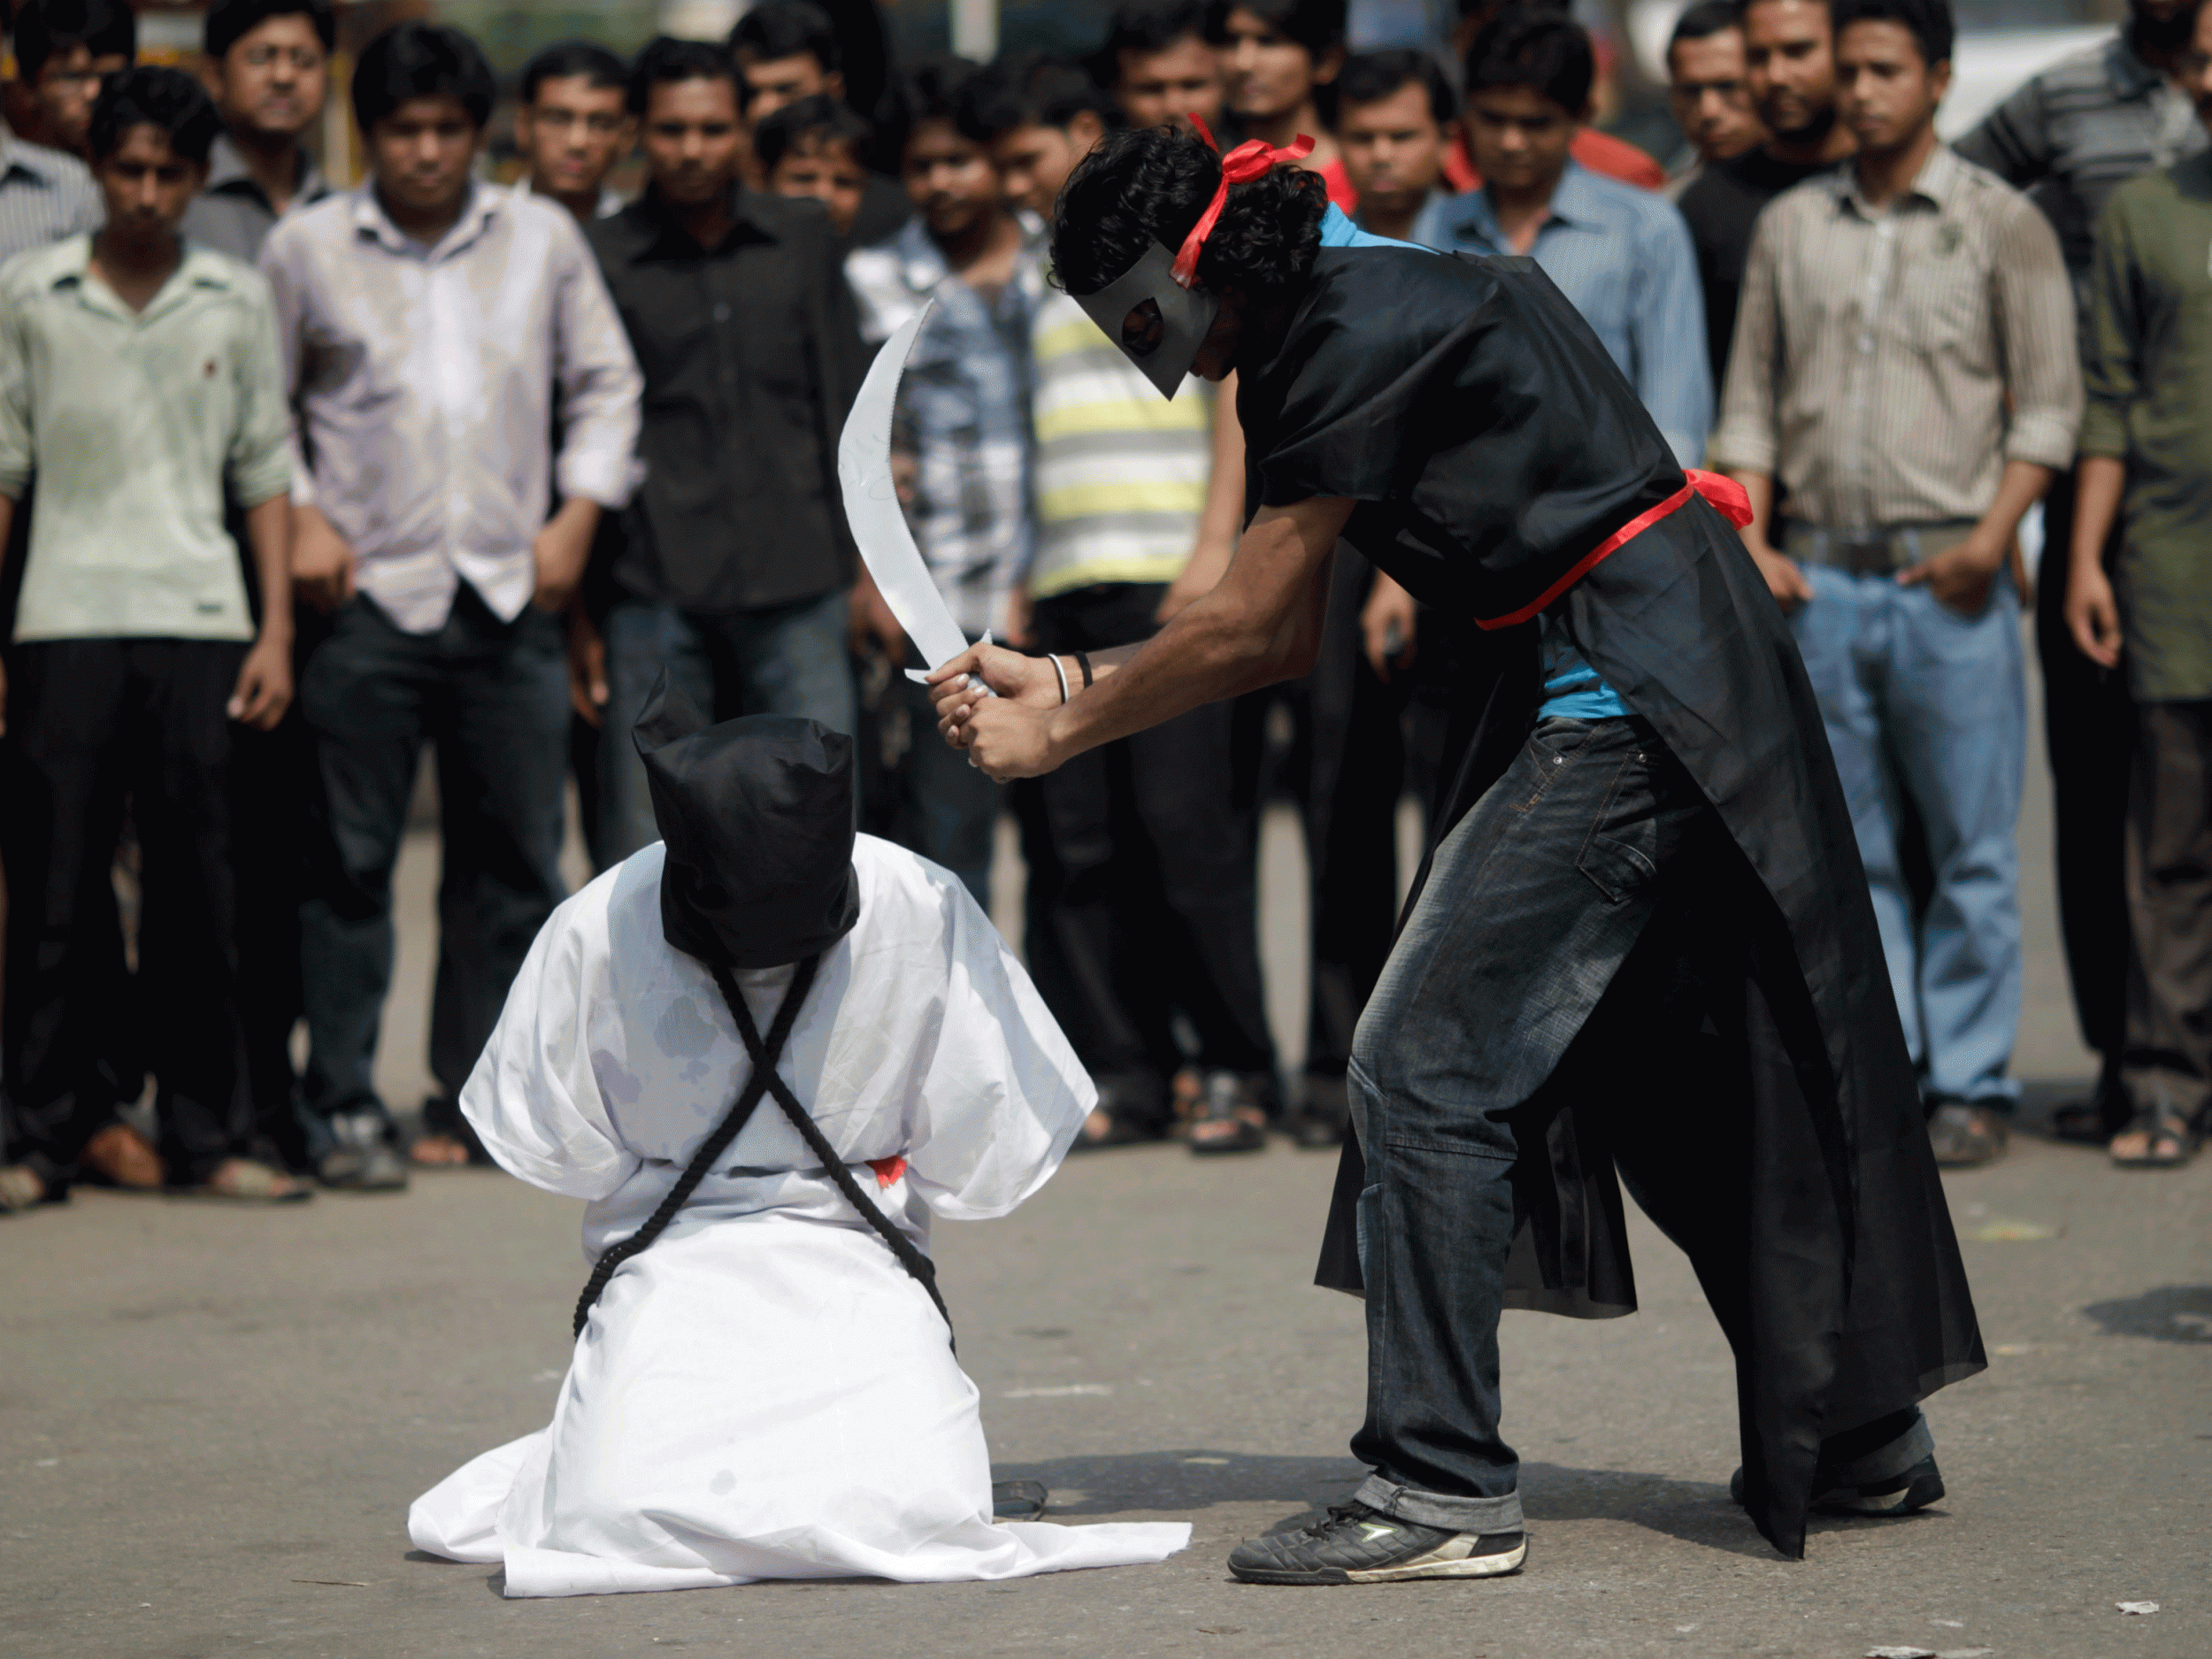 Saudi Arabia 'executes 99th person this year' to overtake 2015 rate